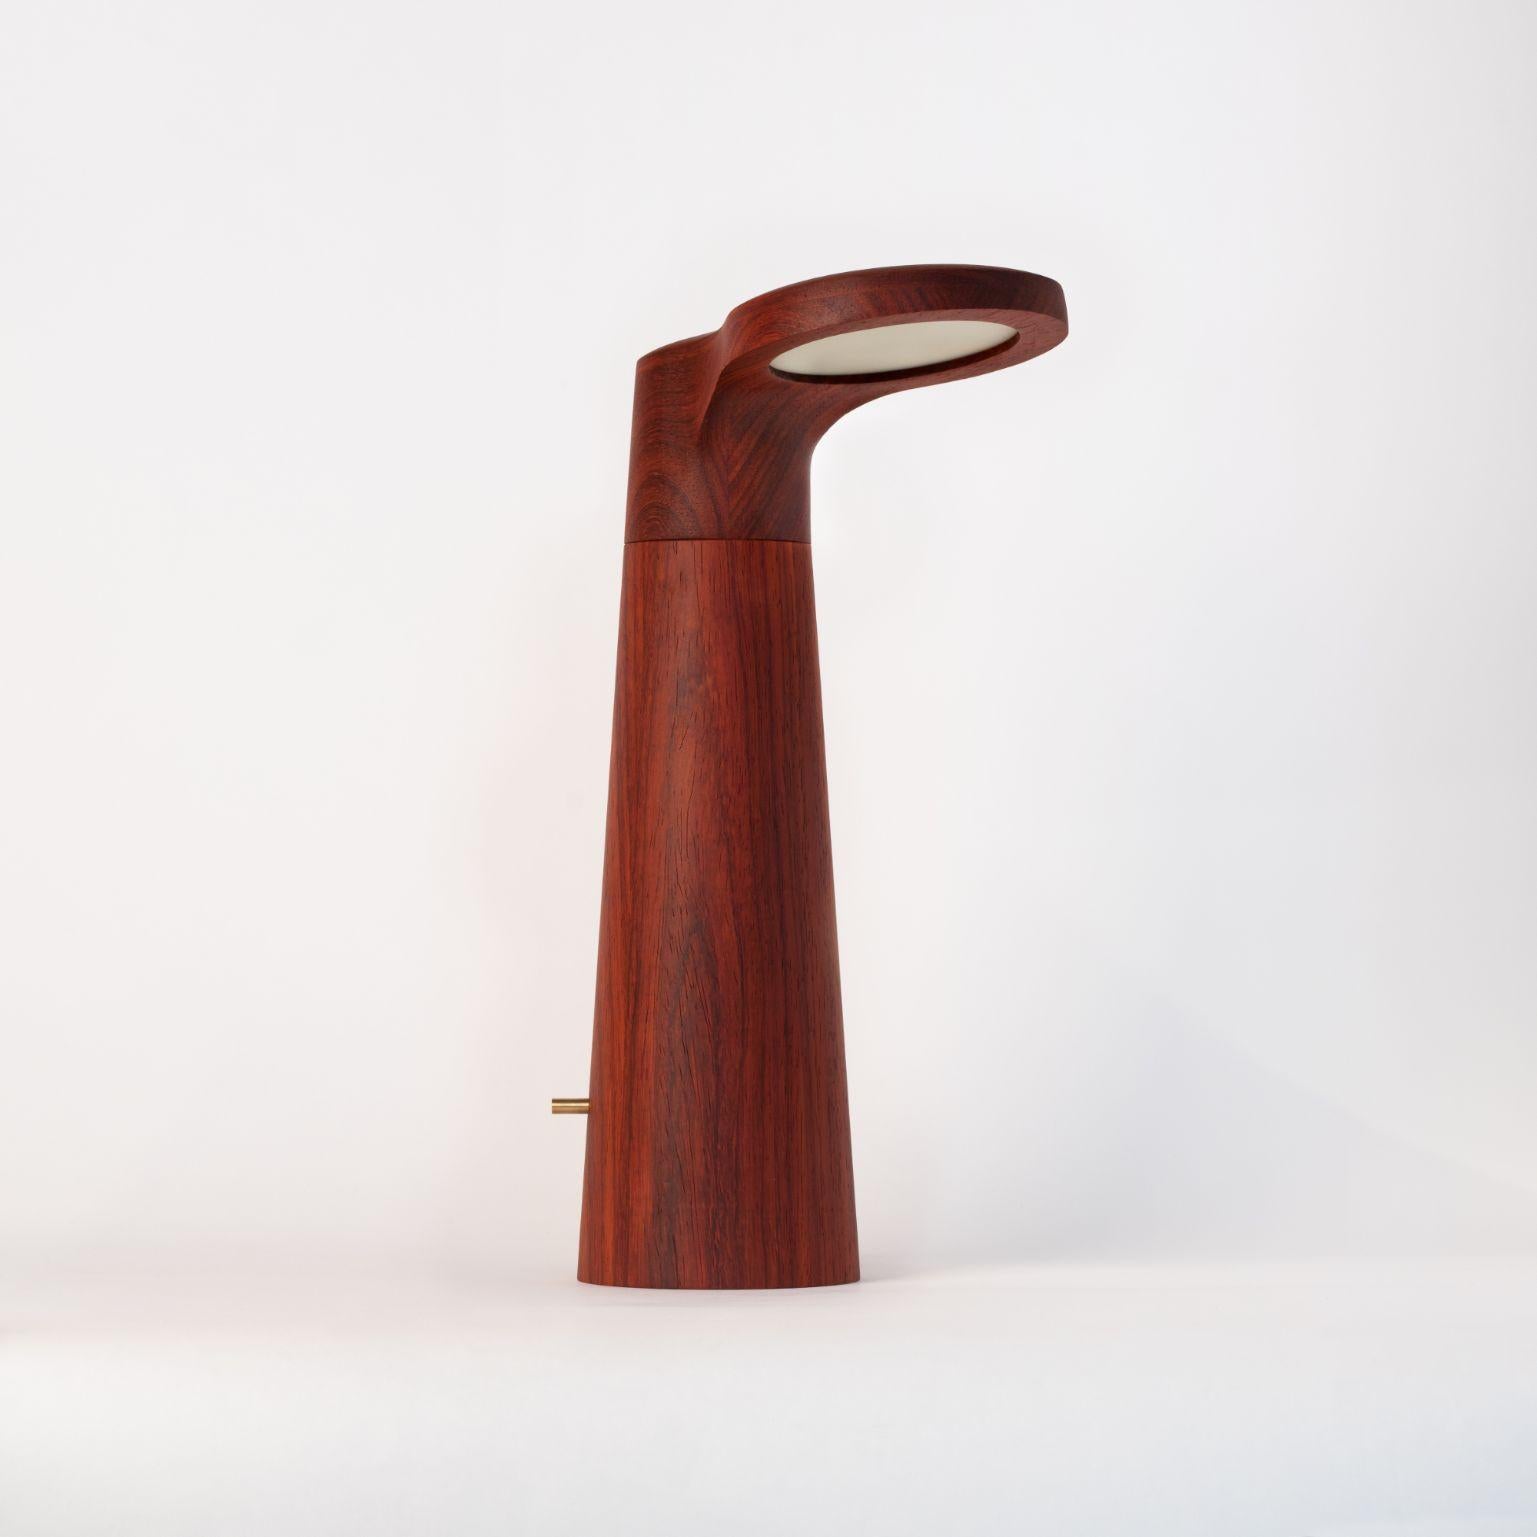 Padouk - Studio light by Isato Prugger
Dimensions: 37 x 22 x 13 cm
Materials: Padouk
Limited edition of 100

Also available in wenge wood, olive wood, canaletto walnut, oak, white ash. All our lamps can be wired according to each country. If